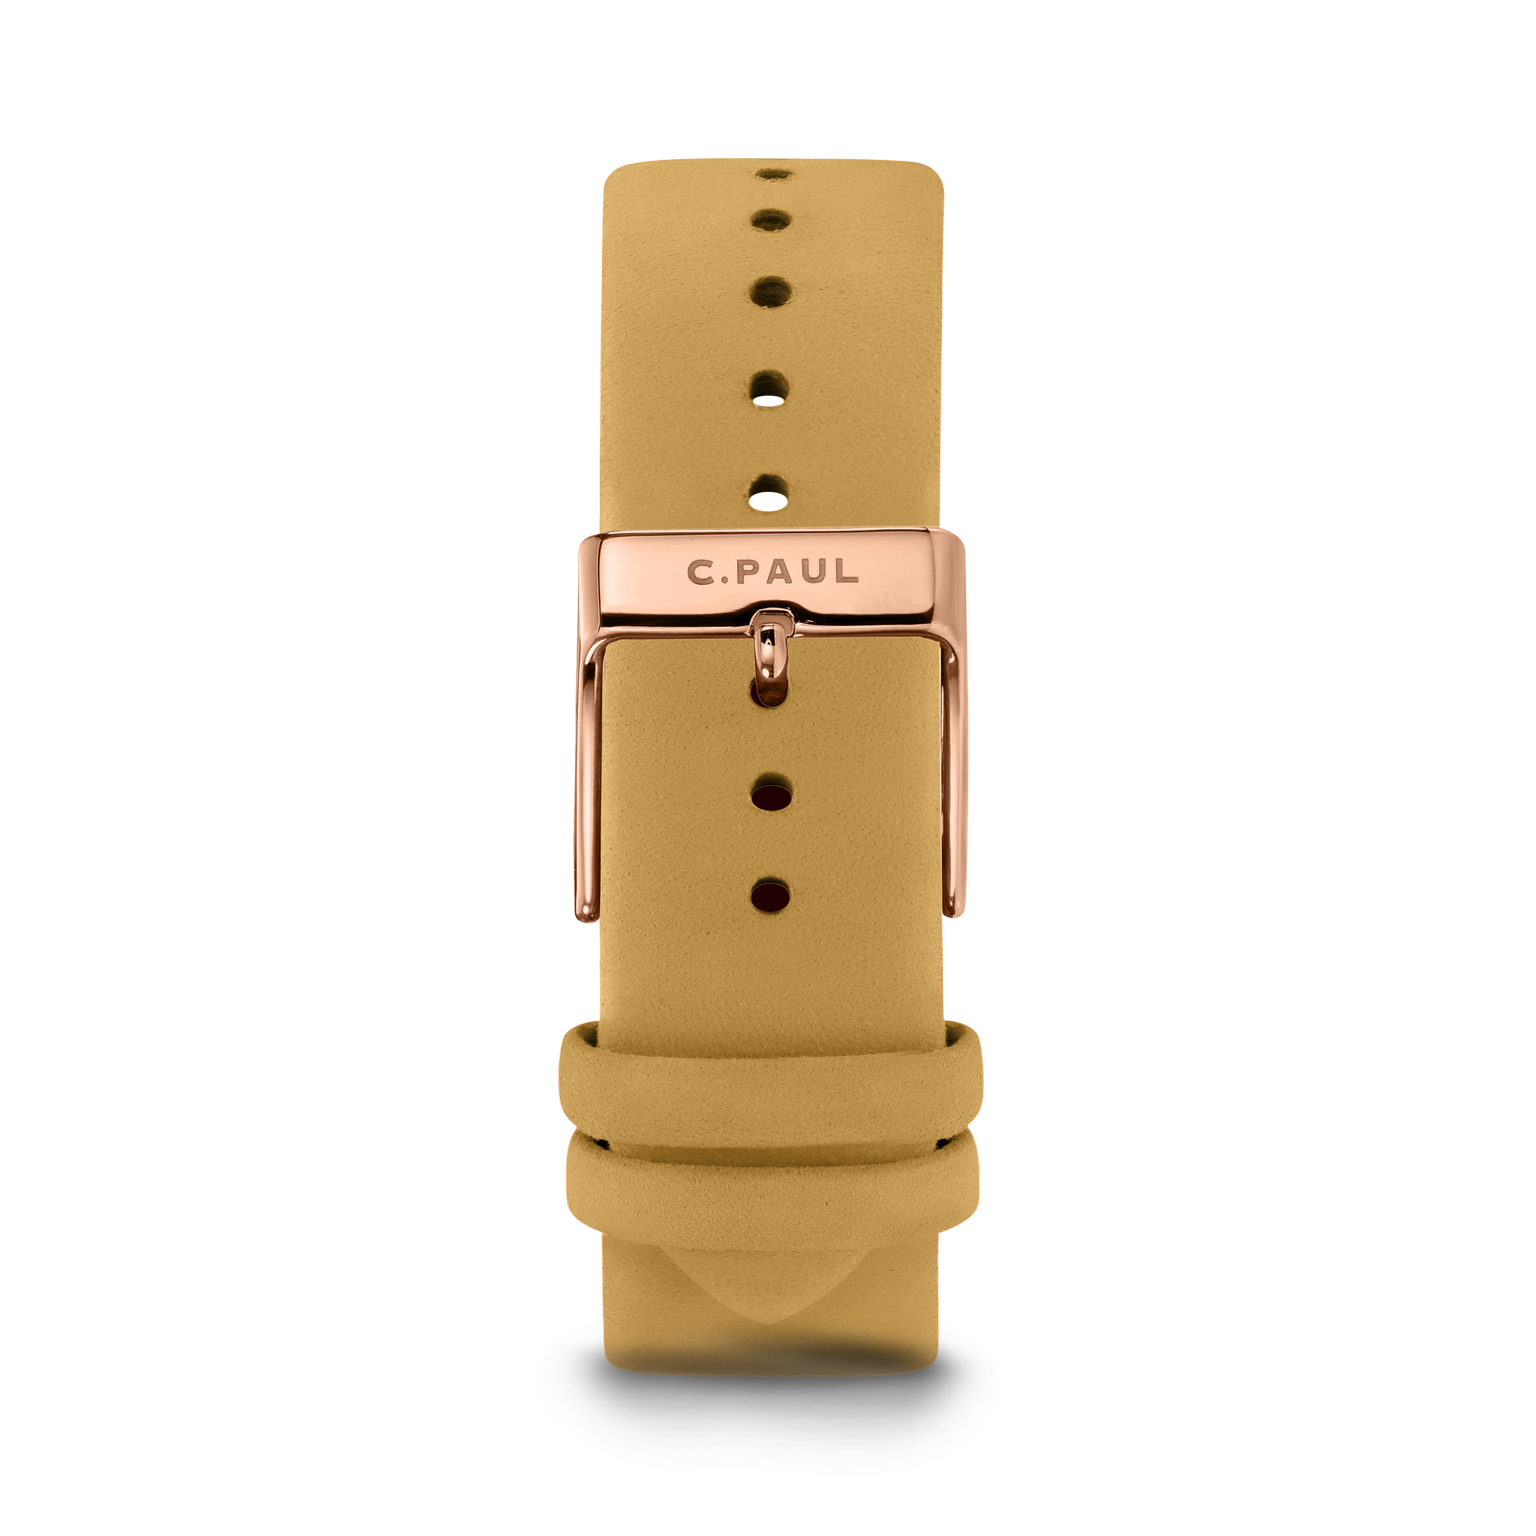 floral mustard and rose gold watch